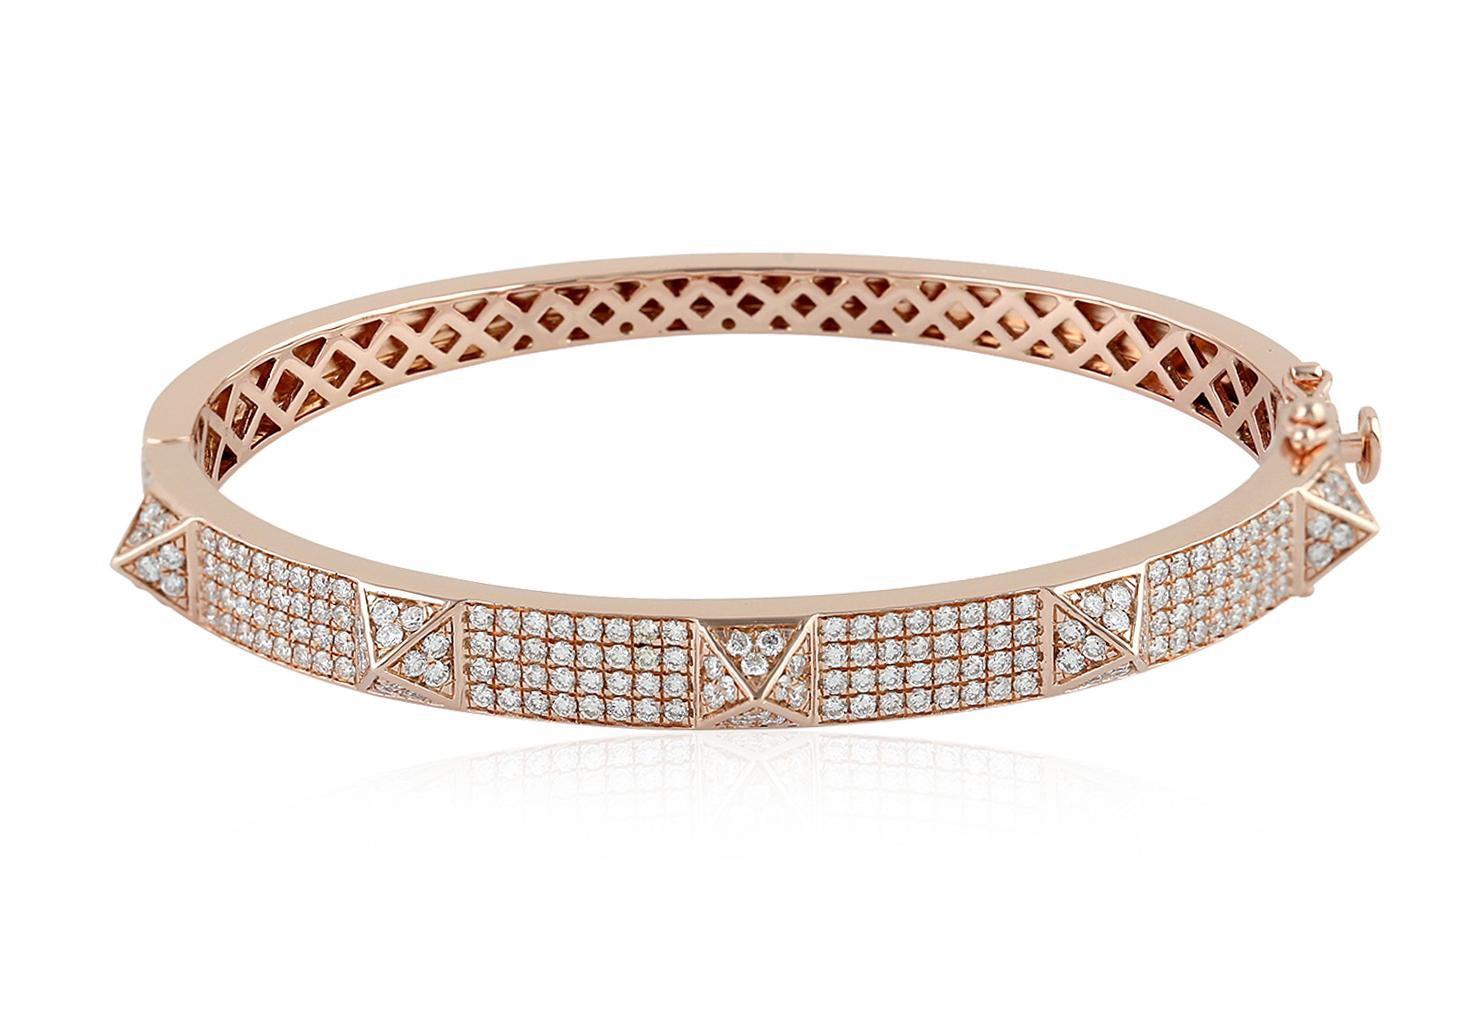 A spike bangle bracelet handmade in 18K rose gold and set with 1.79 of sparkling diamonds.  Also available in yellow gold. Clasp Closure

FOLLOW  MEGHNA JEWELS storefront to view the latest collection & exclusive pieces.  Meghna Jewels is proudly